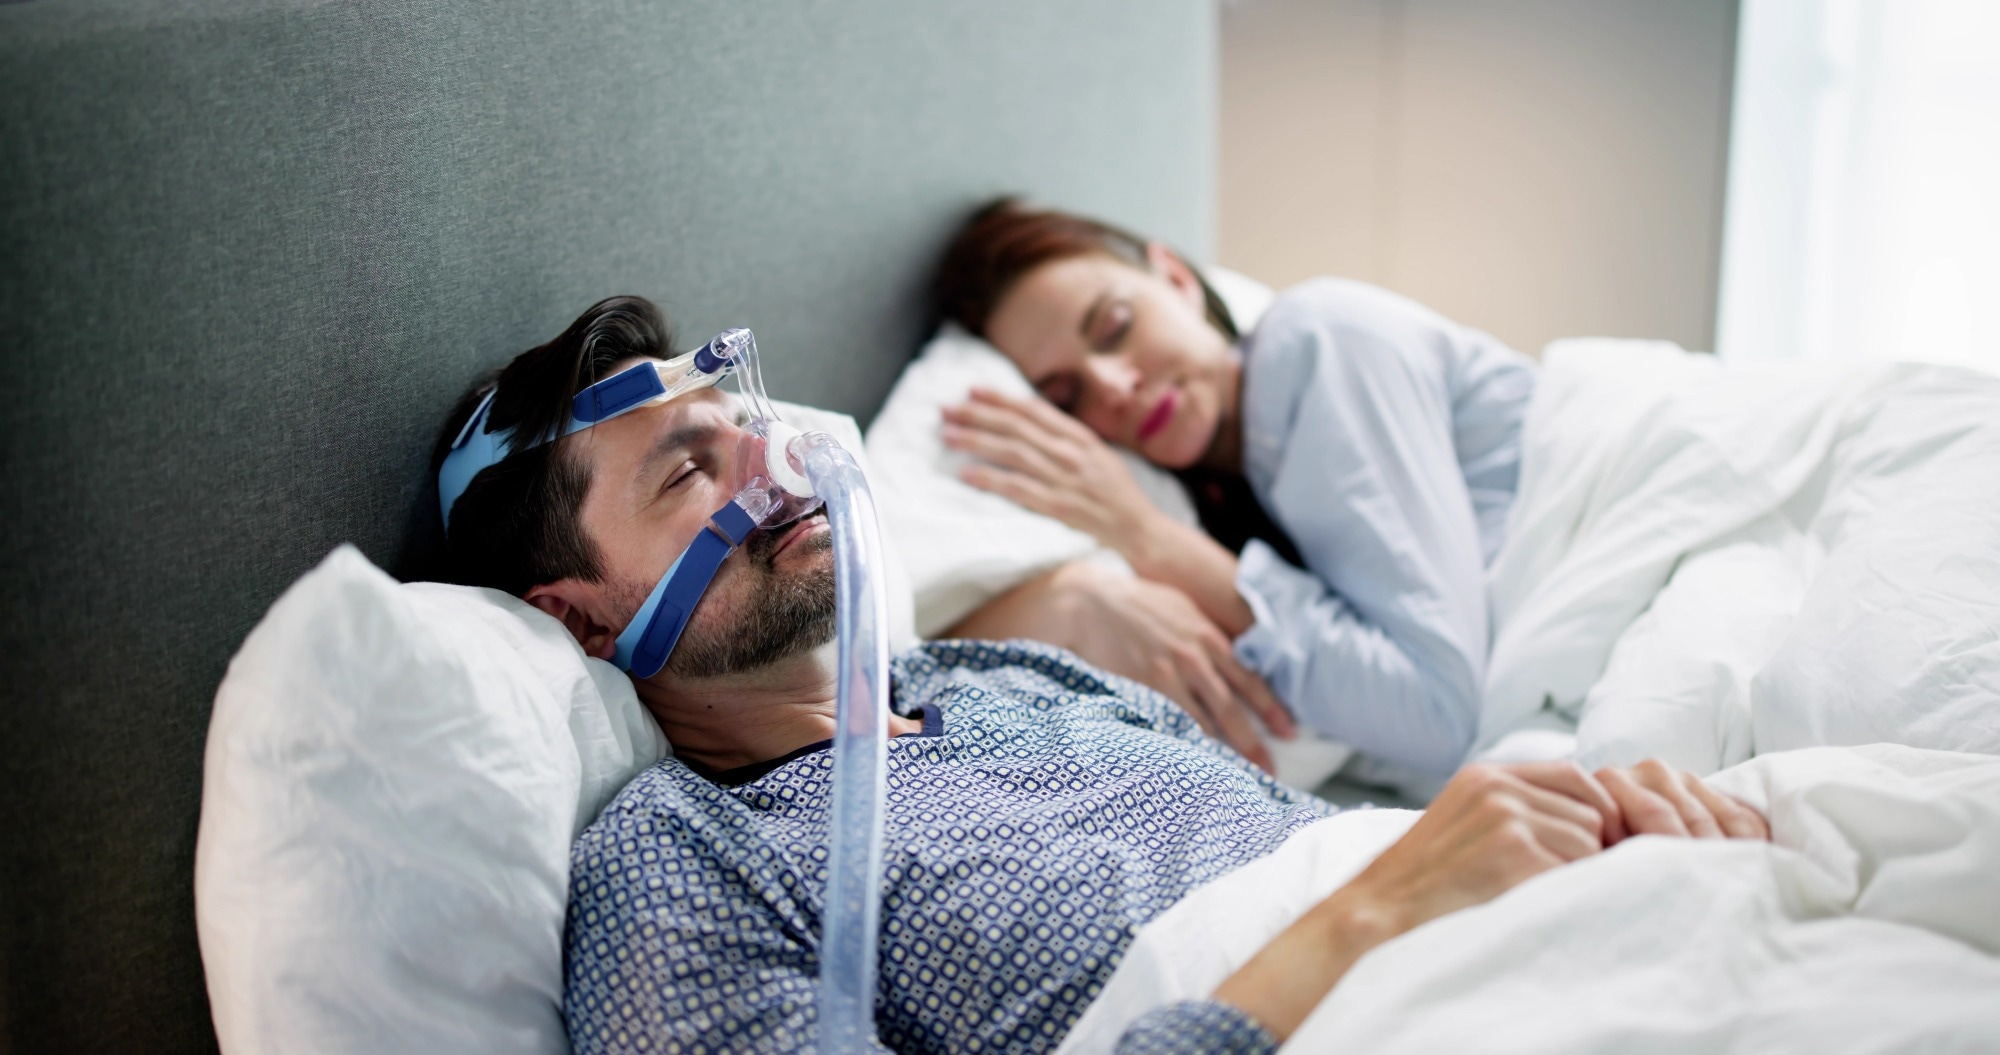 Study: Association of Sex With Cardiovascular Outcomes in Heart Failure Patients With Obstructive or Central Sleep Apnea. Image Credit: Andrey Popov / Shutterstock.com